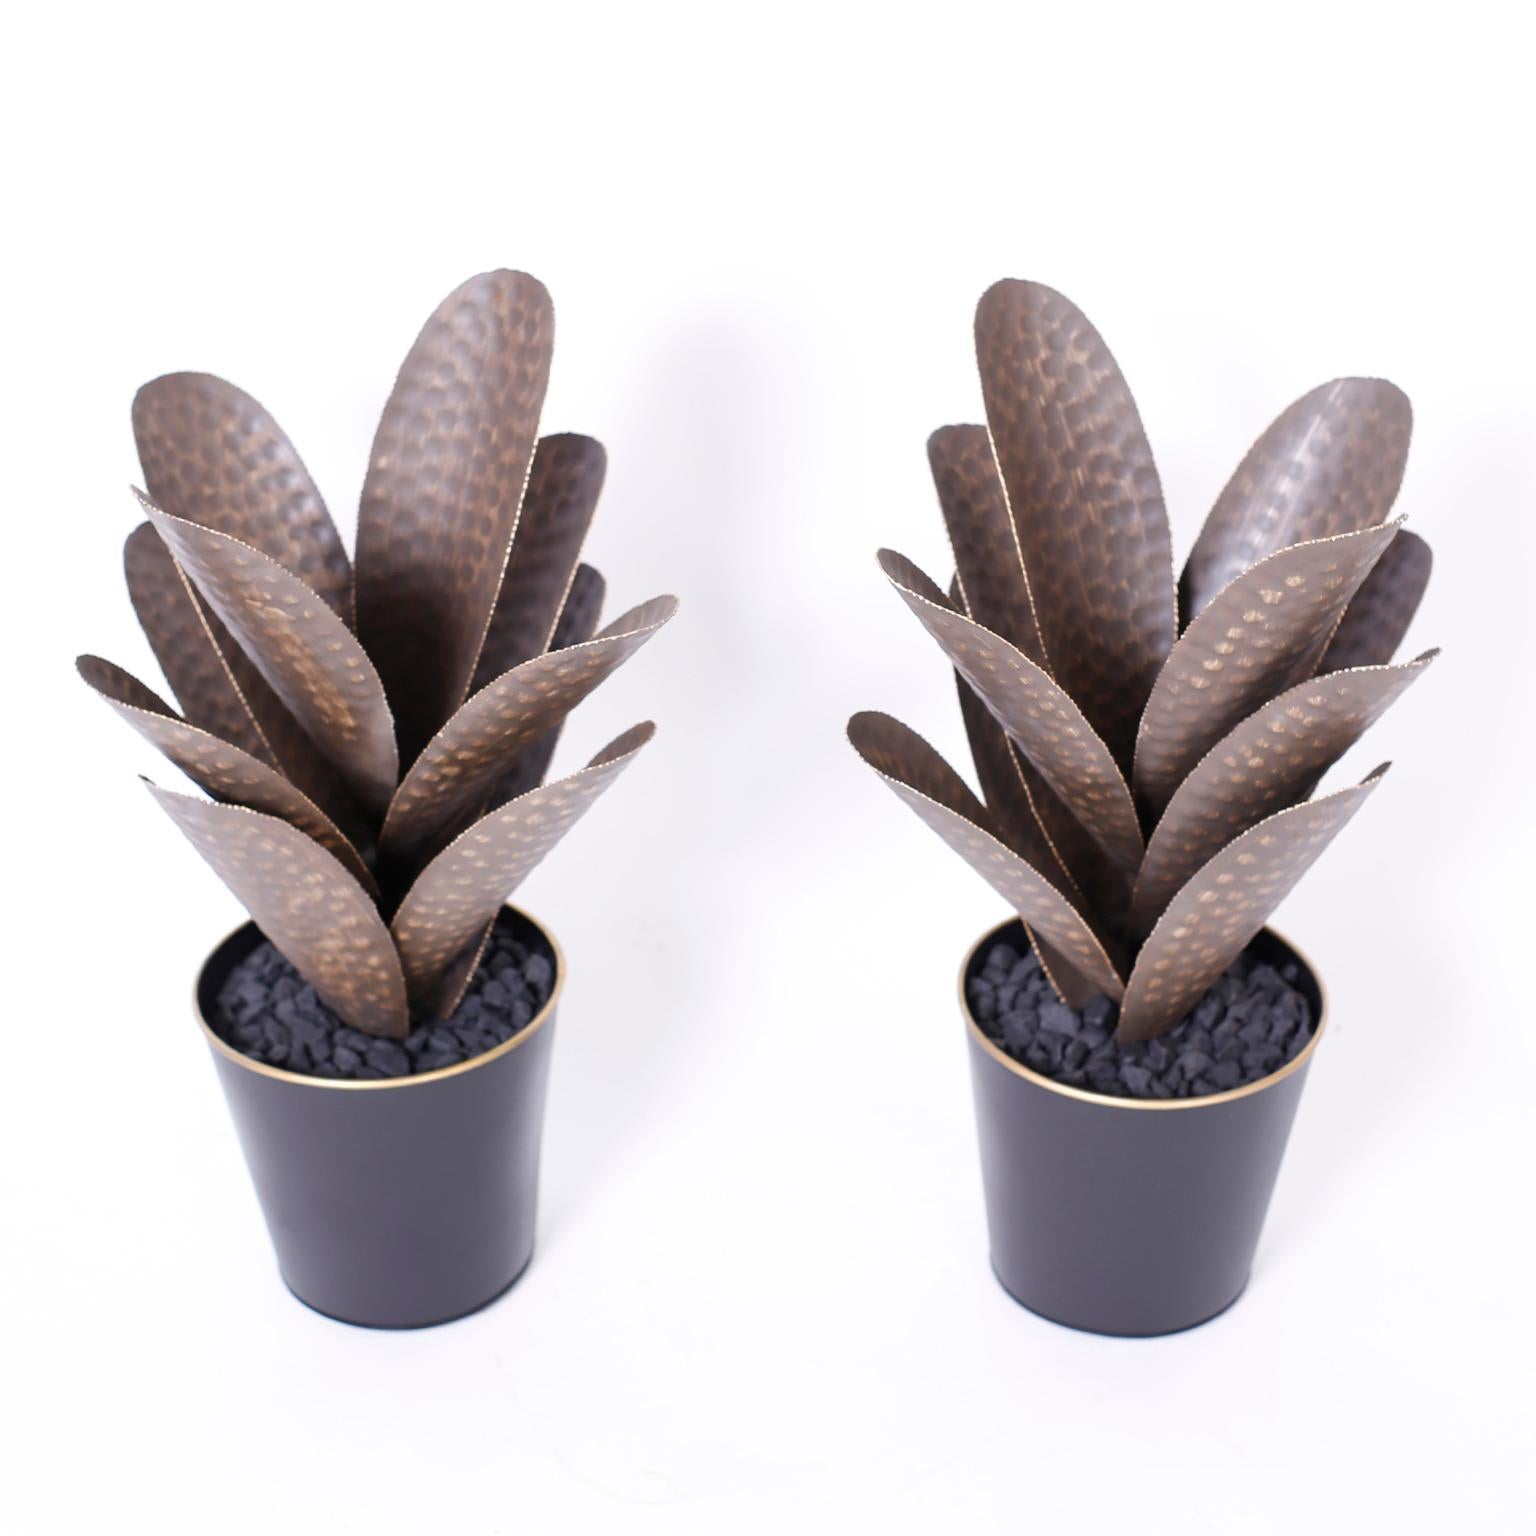 Pair of faux agave plants crafted in brass with a contrived patina and serrated edges set in metal planters with faux black rocks.